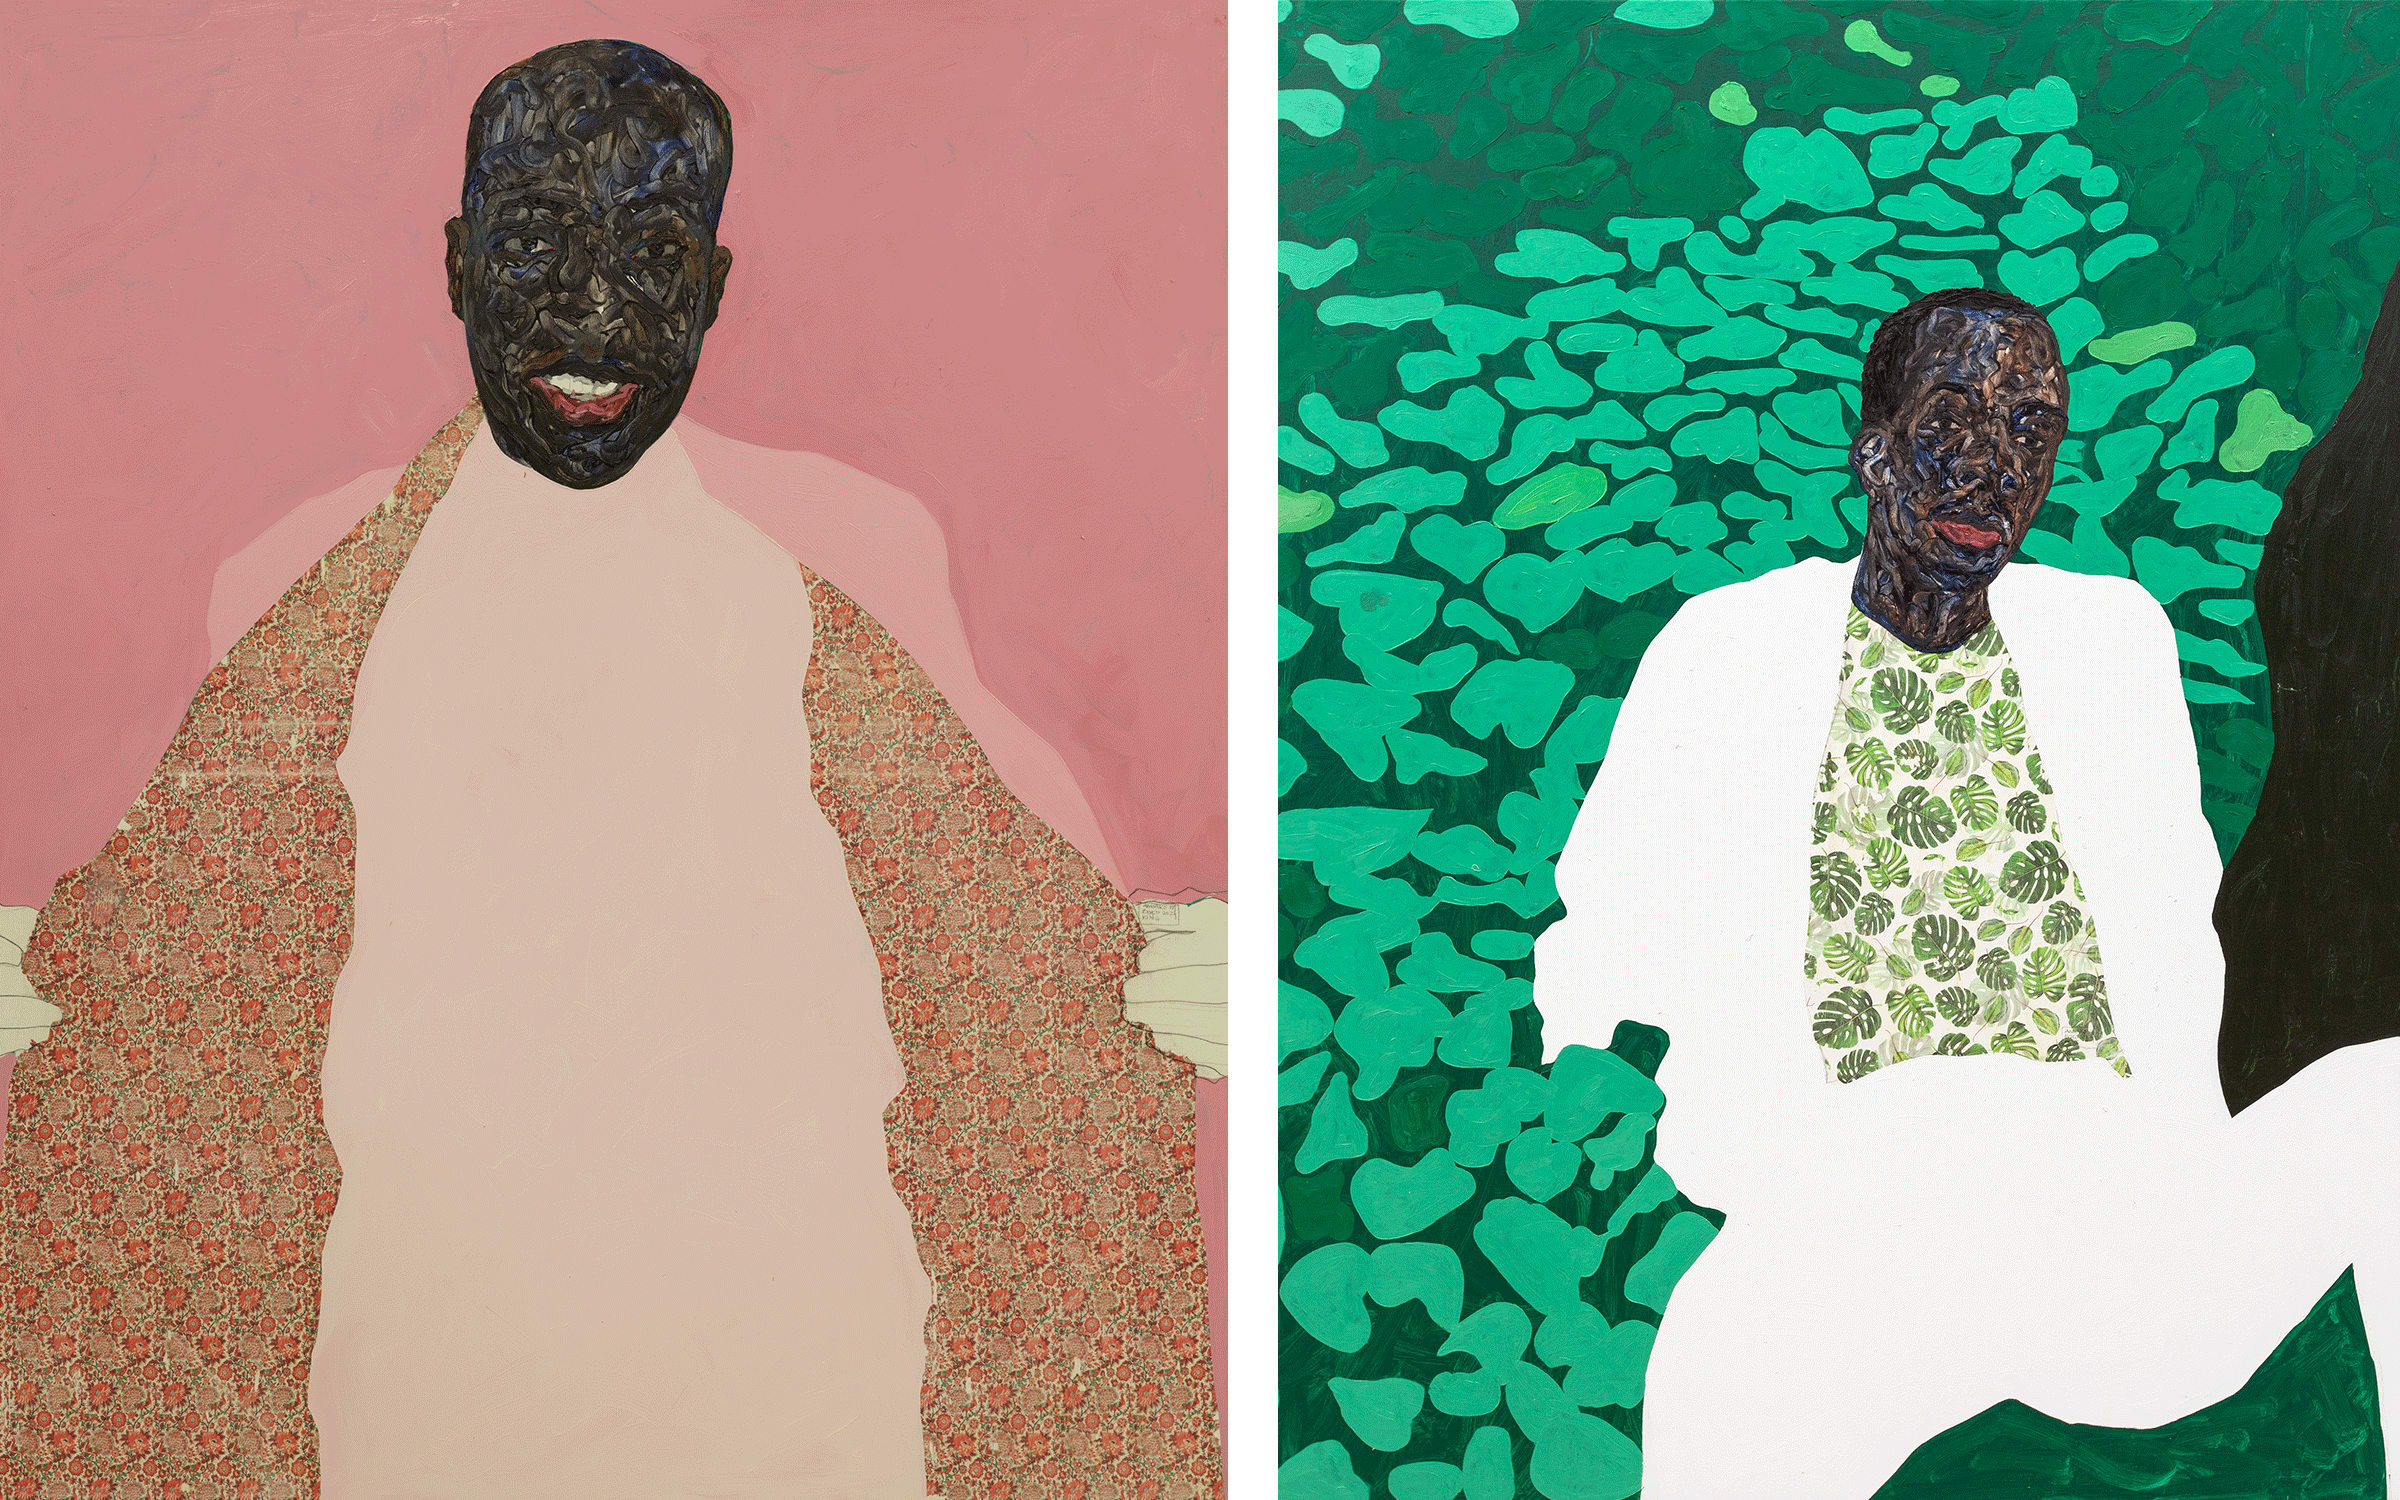 Both artworks by Amoako Boafo, courtesy of Mariane Ibrahim. Left: Floral Coat Lining, 2022. Right: Green petals, 2022.